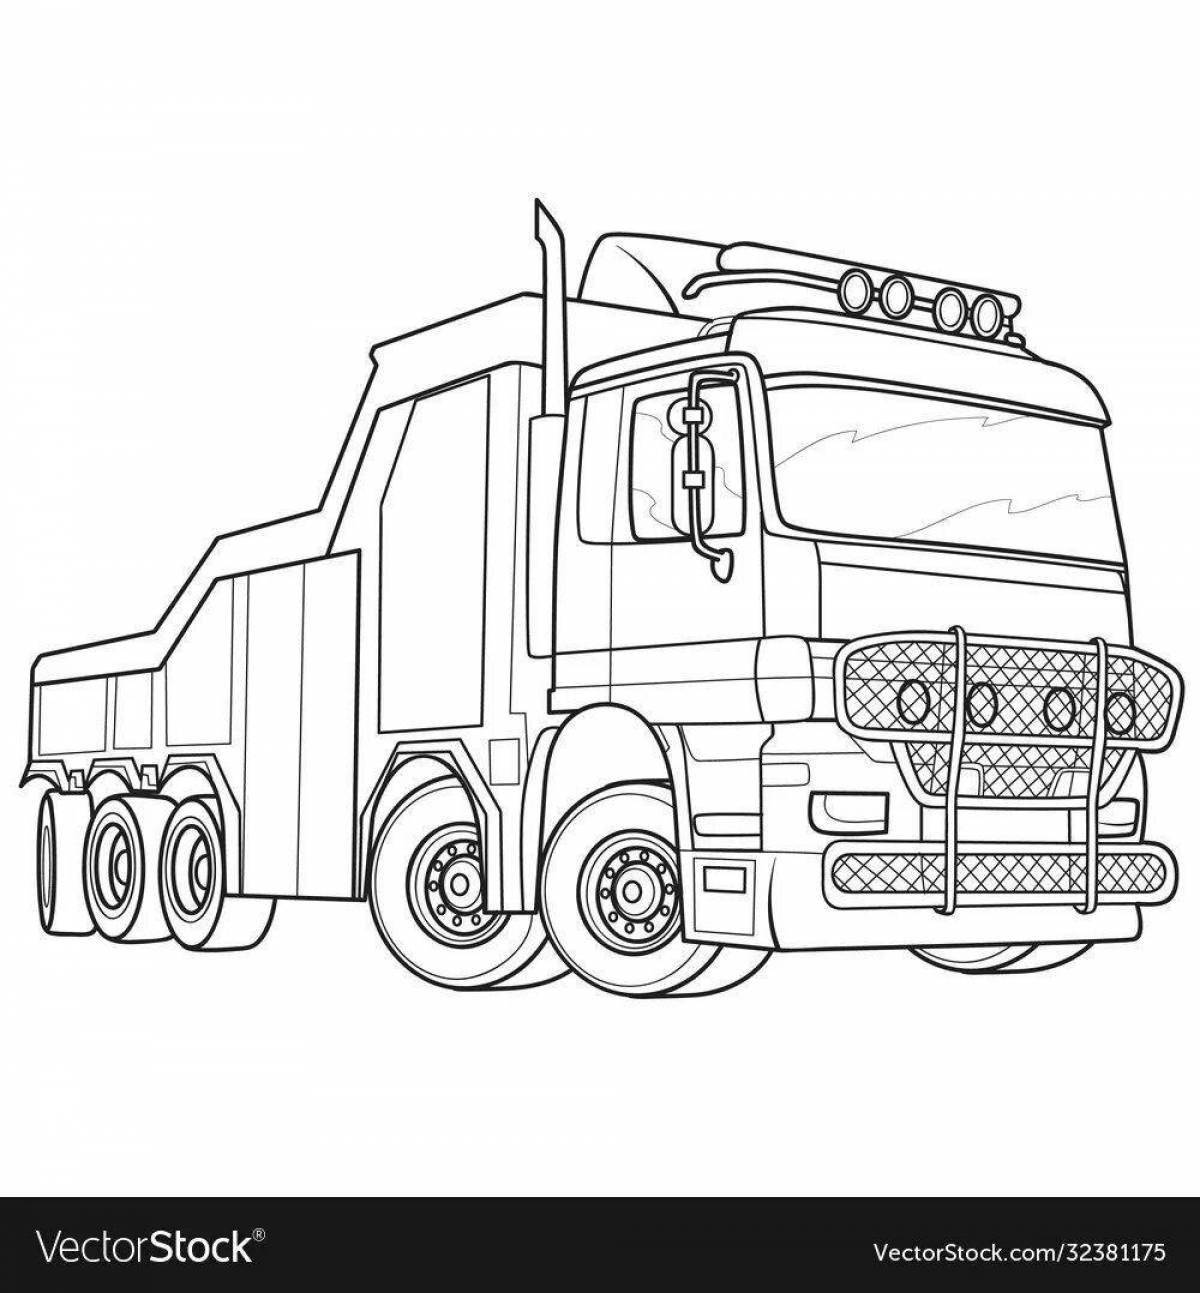 Great car transporter coloring book for kids